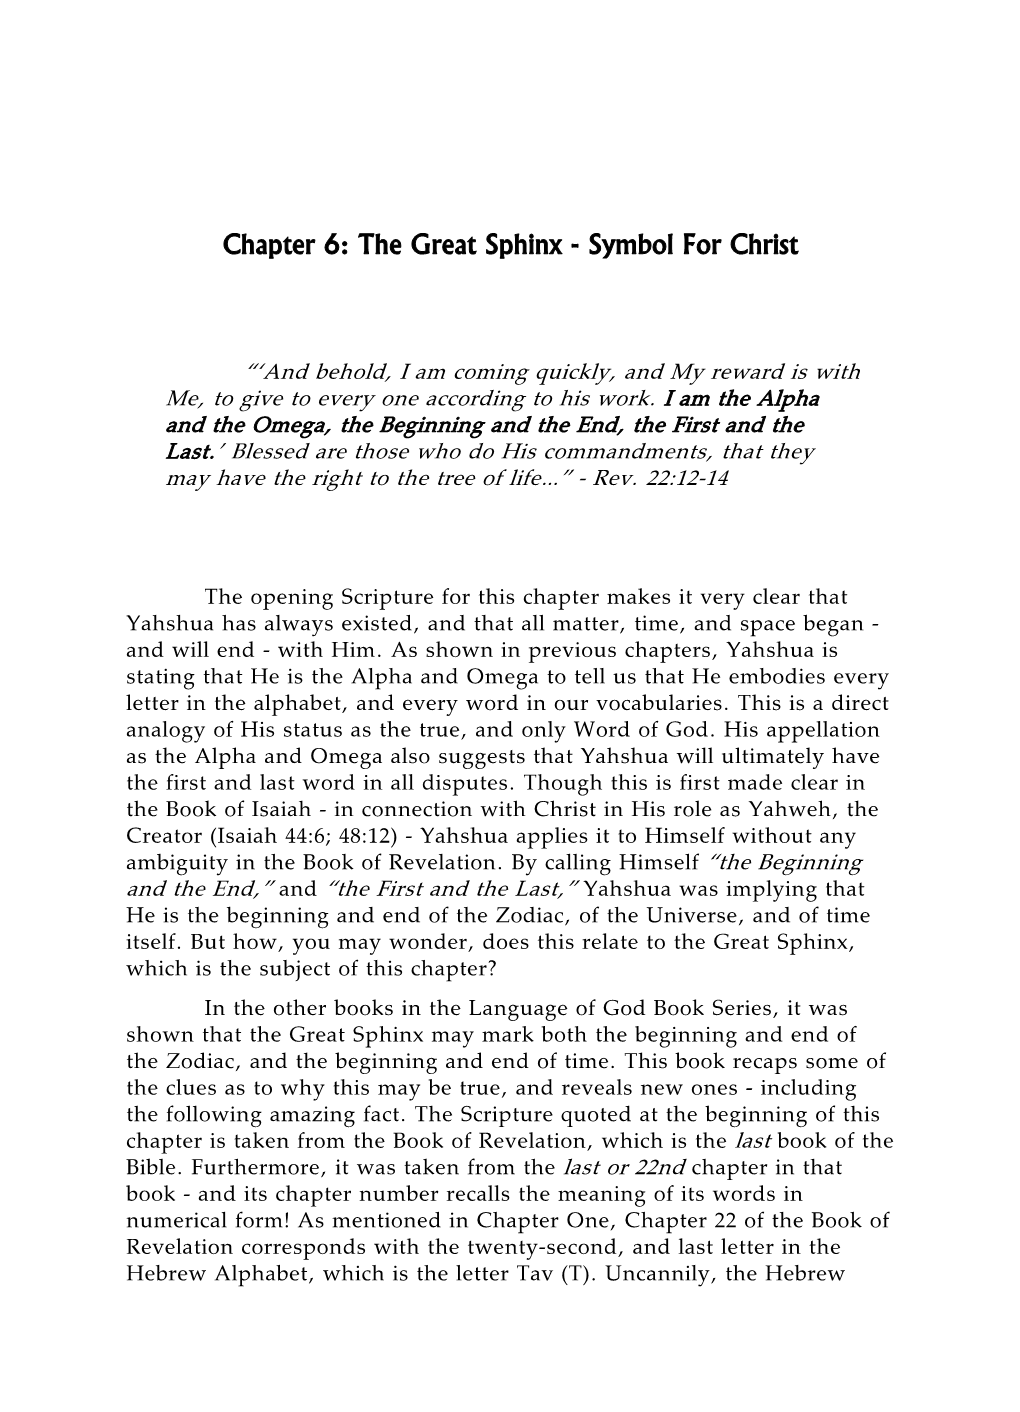 Chapter 6: the Great Sphinx - Symbol for Christ